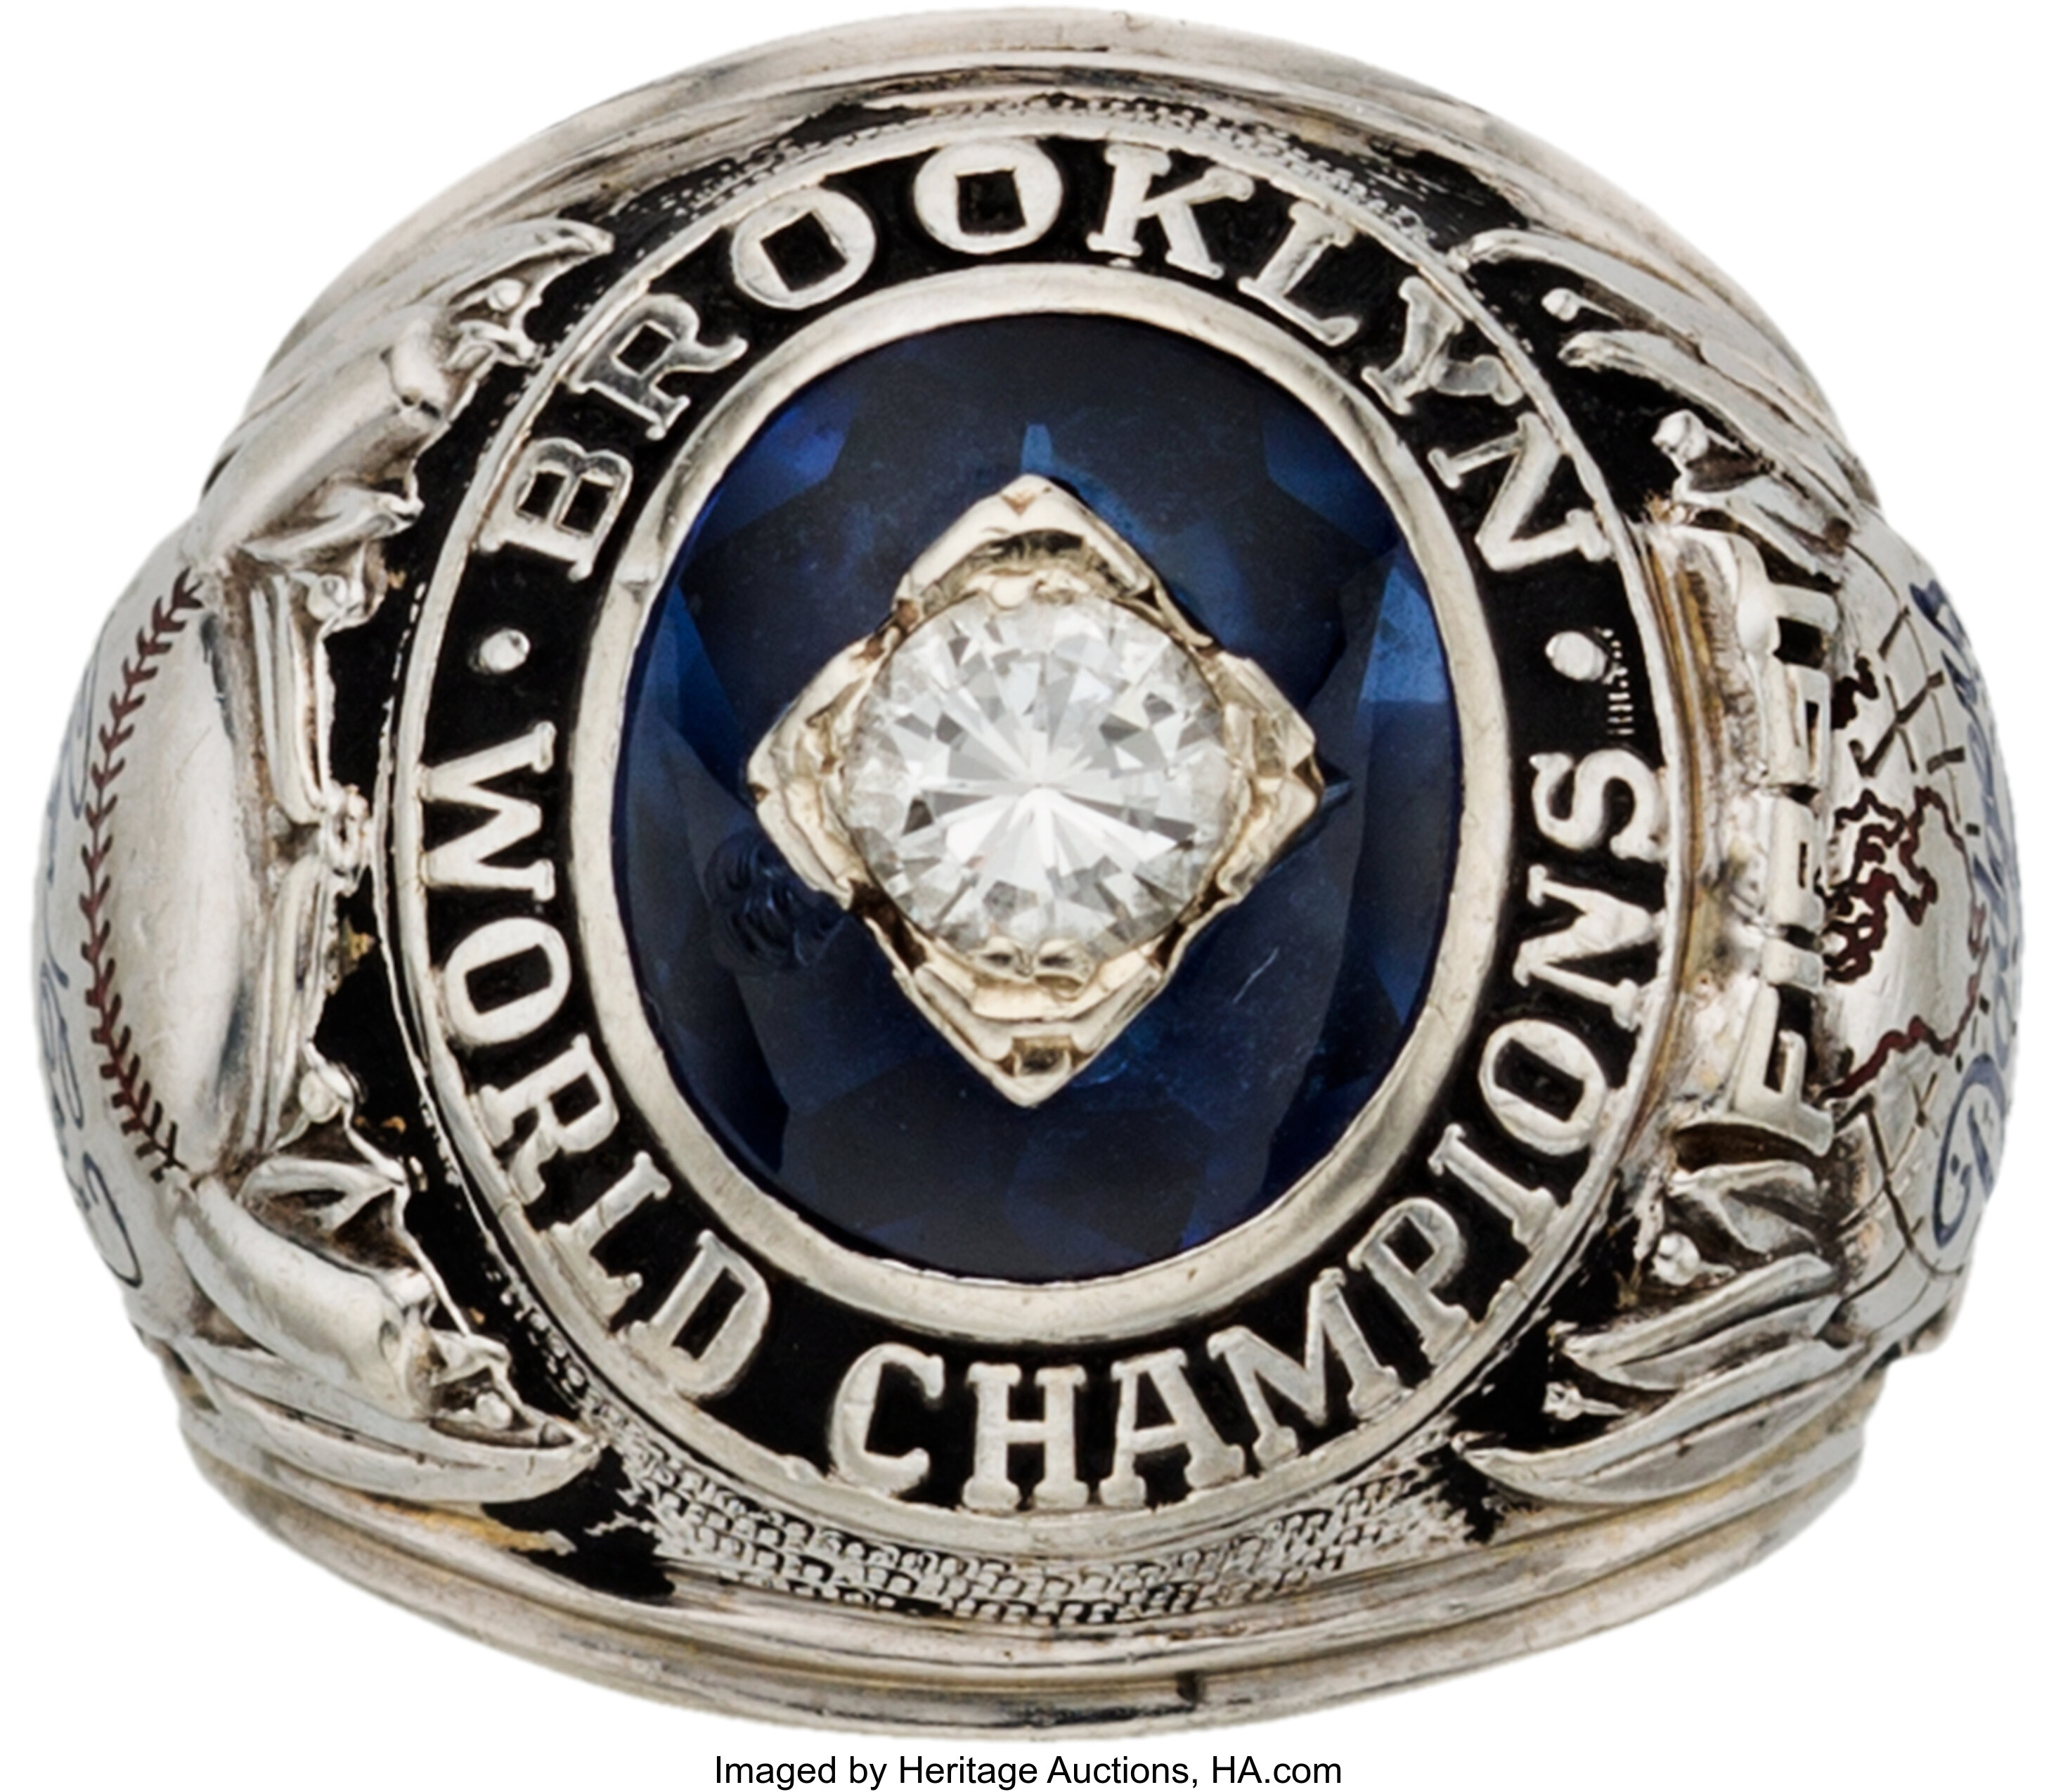 1955 Brooklyn Dodgers World Championship Ring Presented to Pitcher